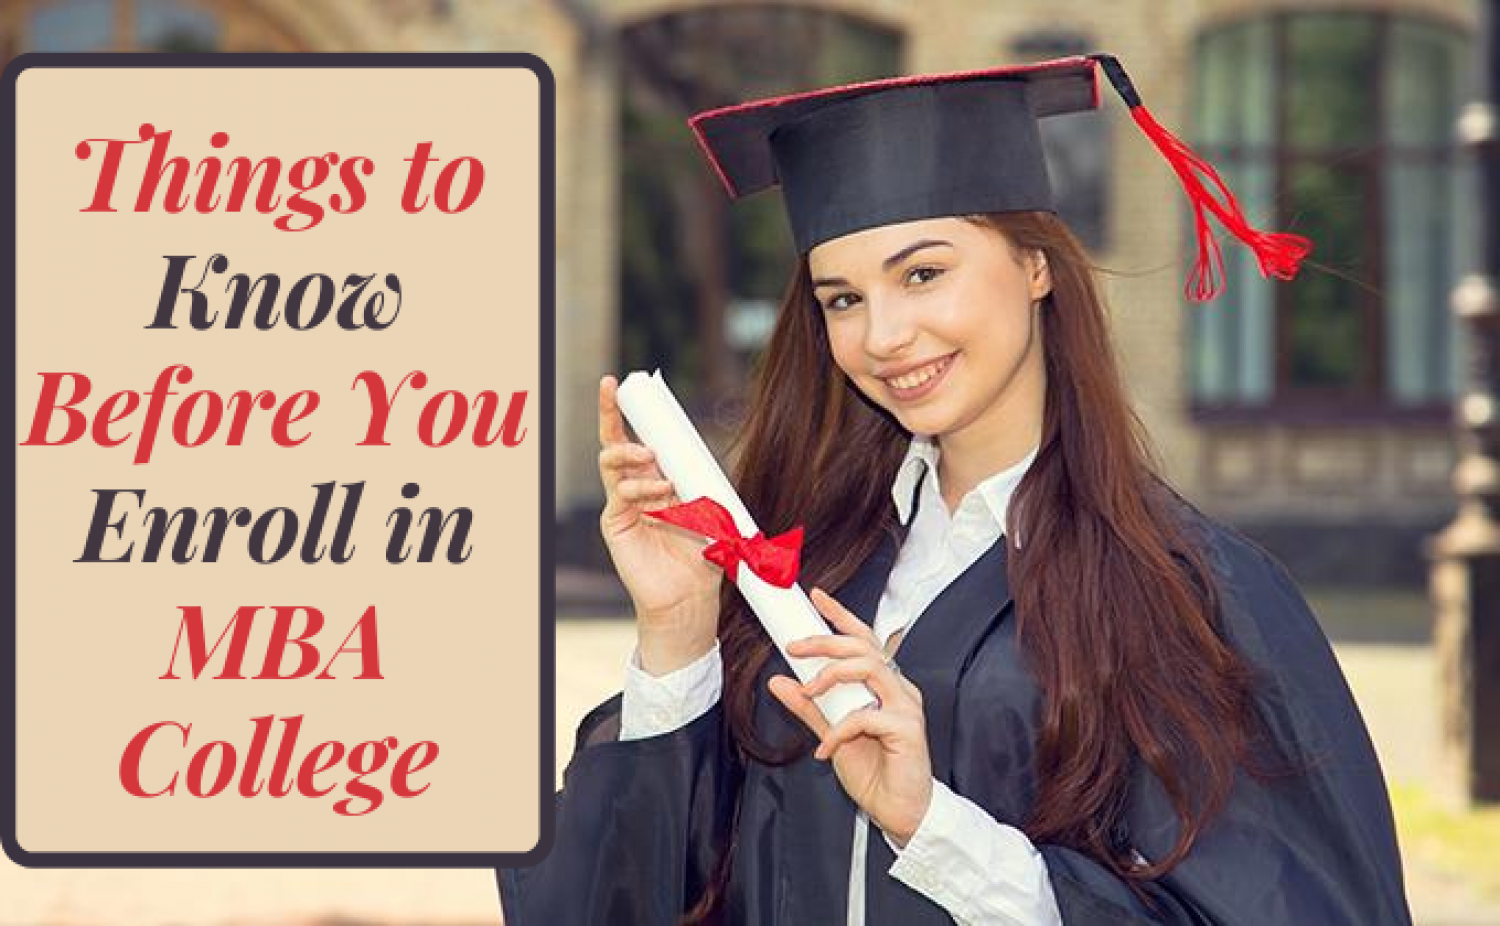 What Are The Things To Know Before You Enroll in MBA College? Infographic